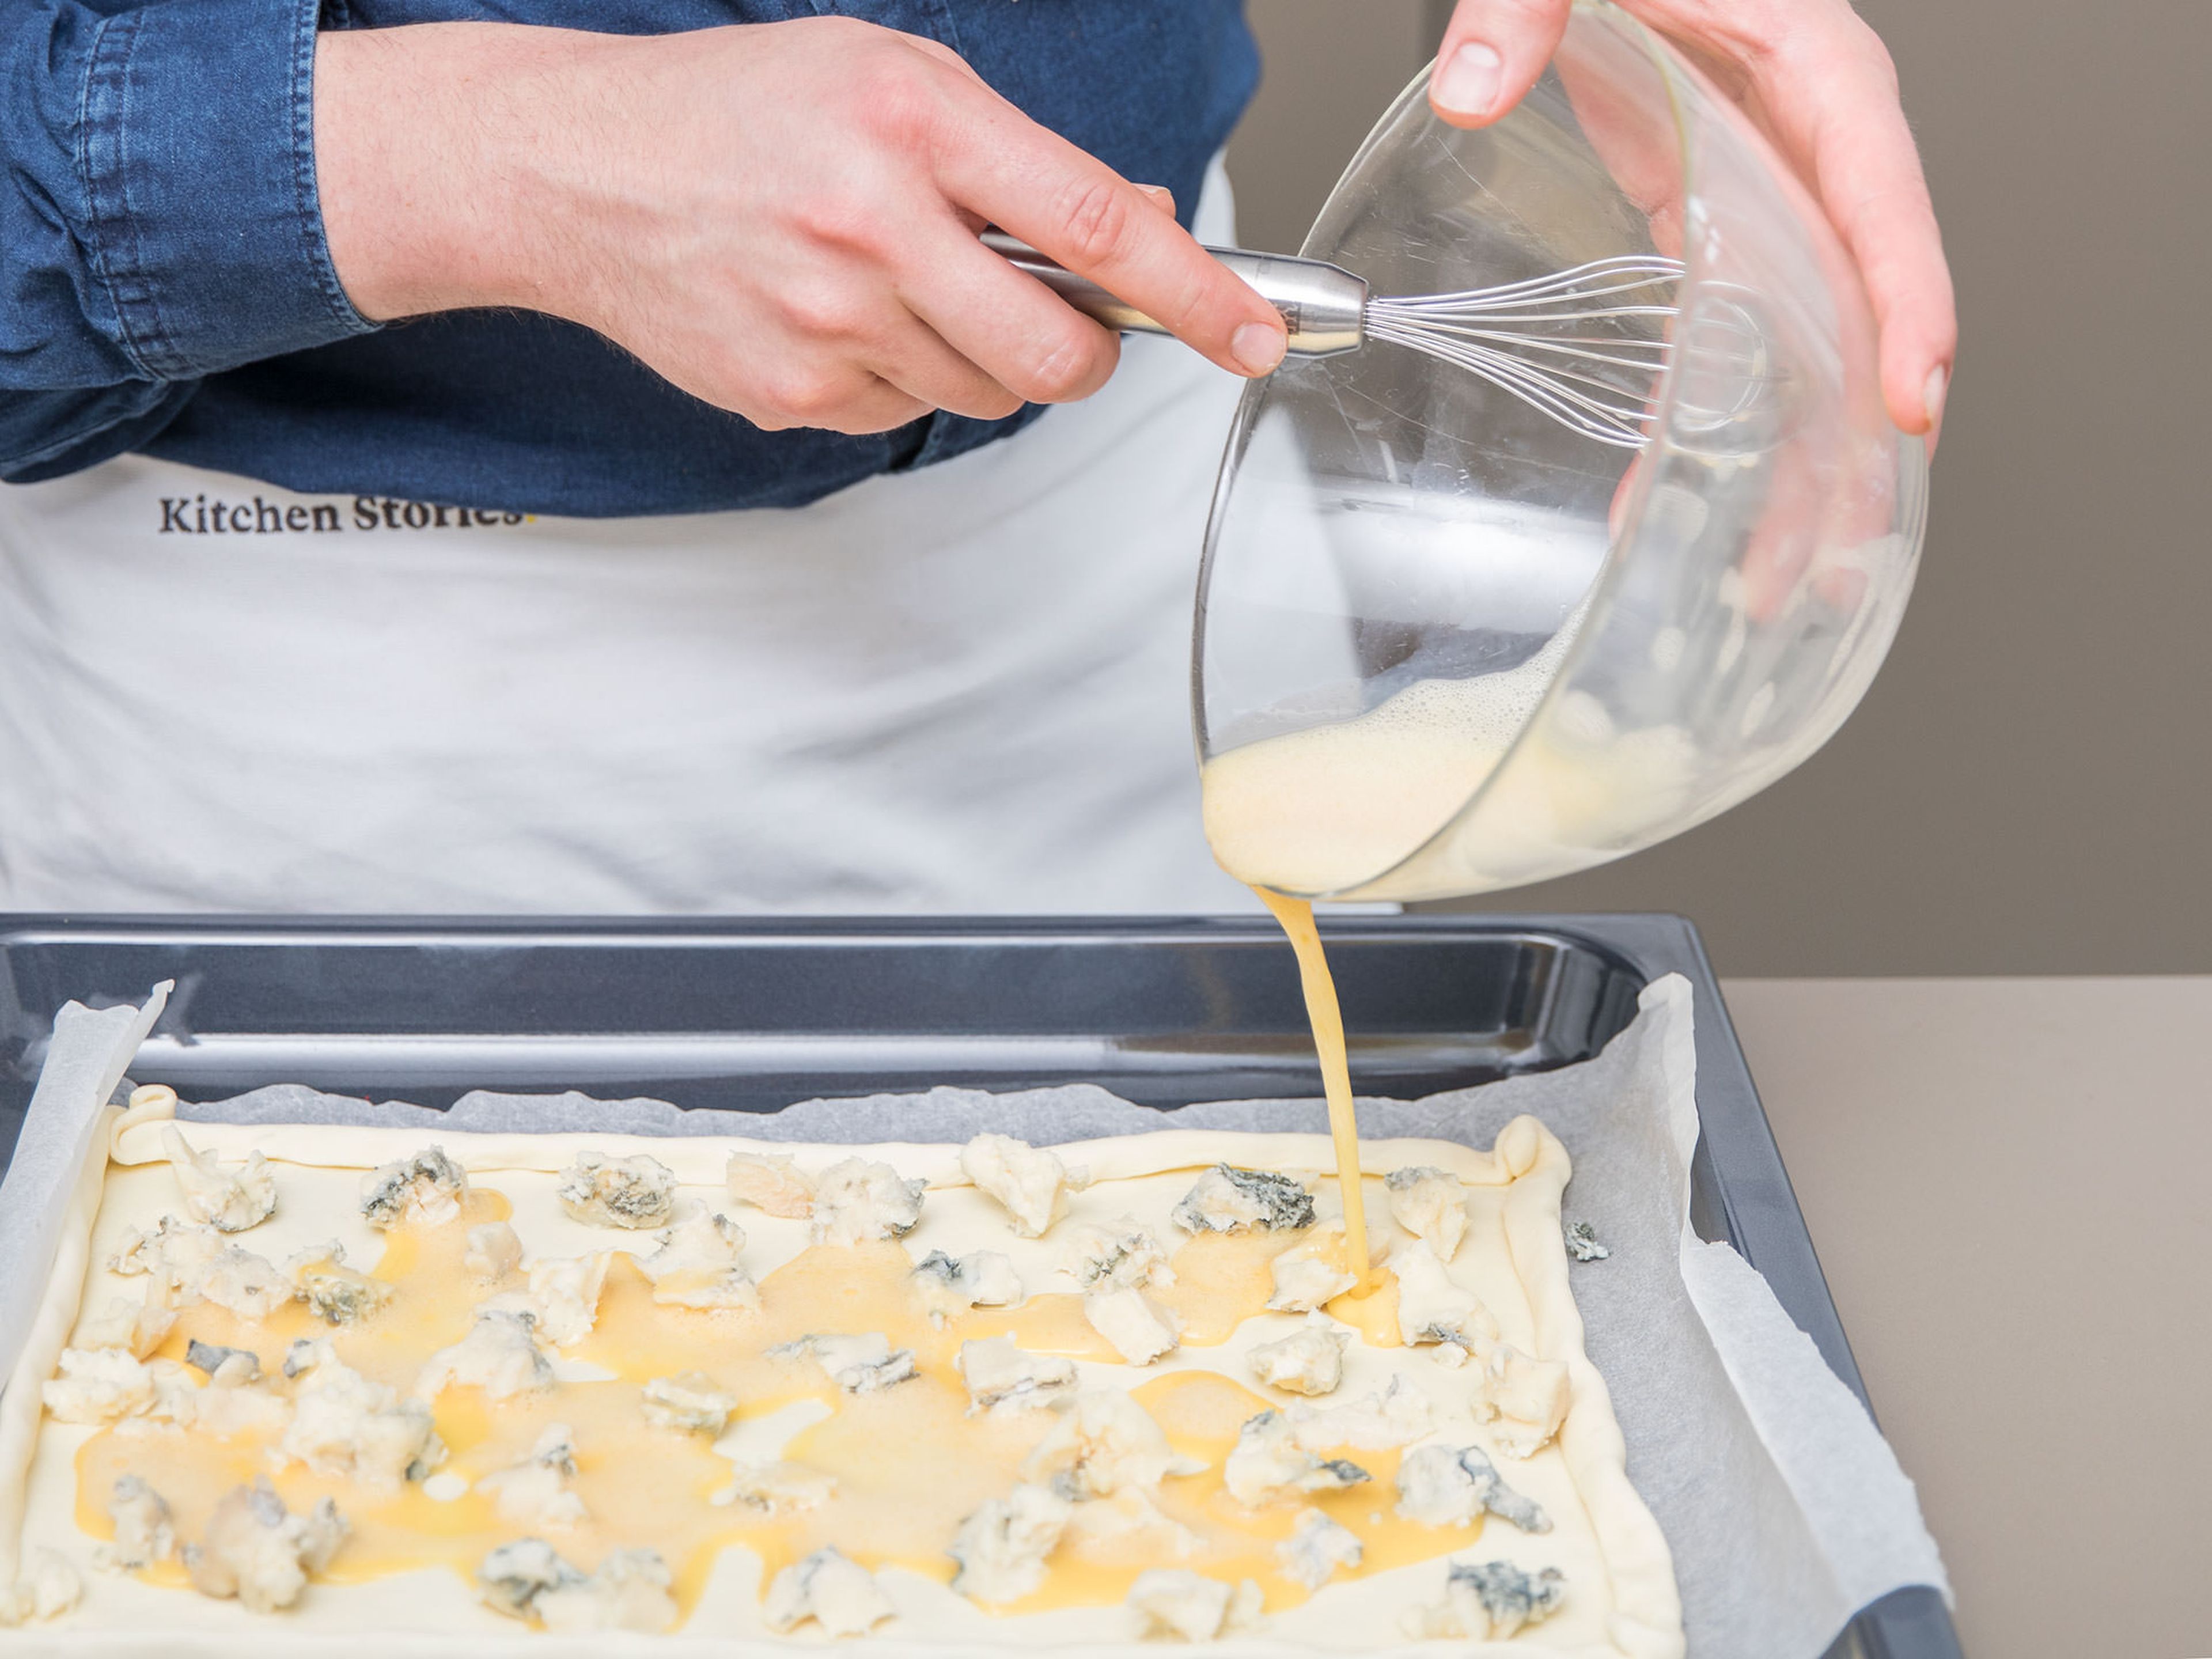 Preheat the oven to 180°C/360°F. Roll out puff pastry on a baking sheet lined with parchment paper. Fold the edges over to create a rim. Spread a thin layer of Gorgonzola cheese on top. Beat the eggs and spread them over the cheese.